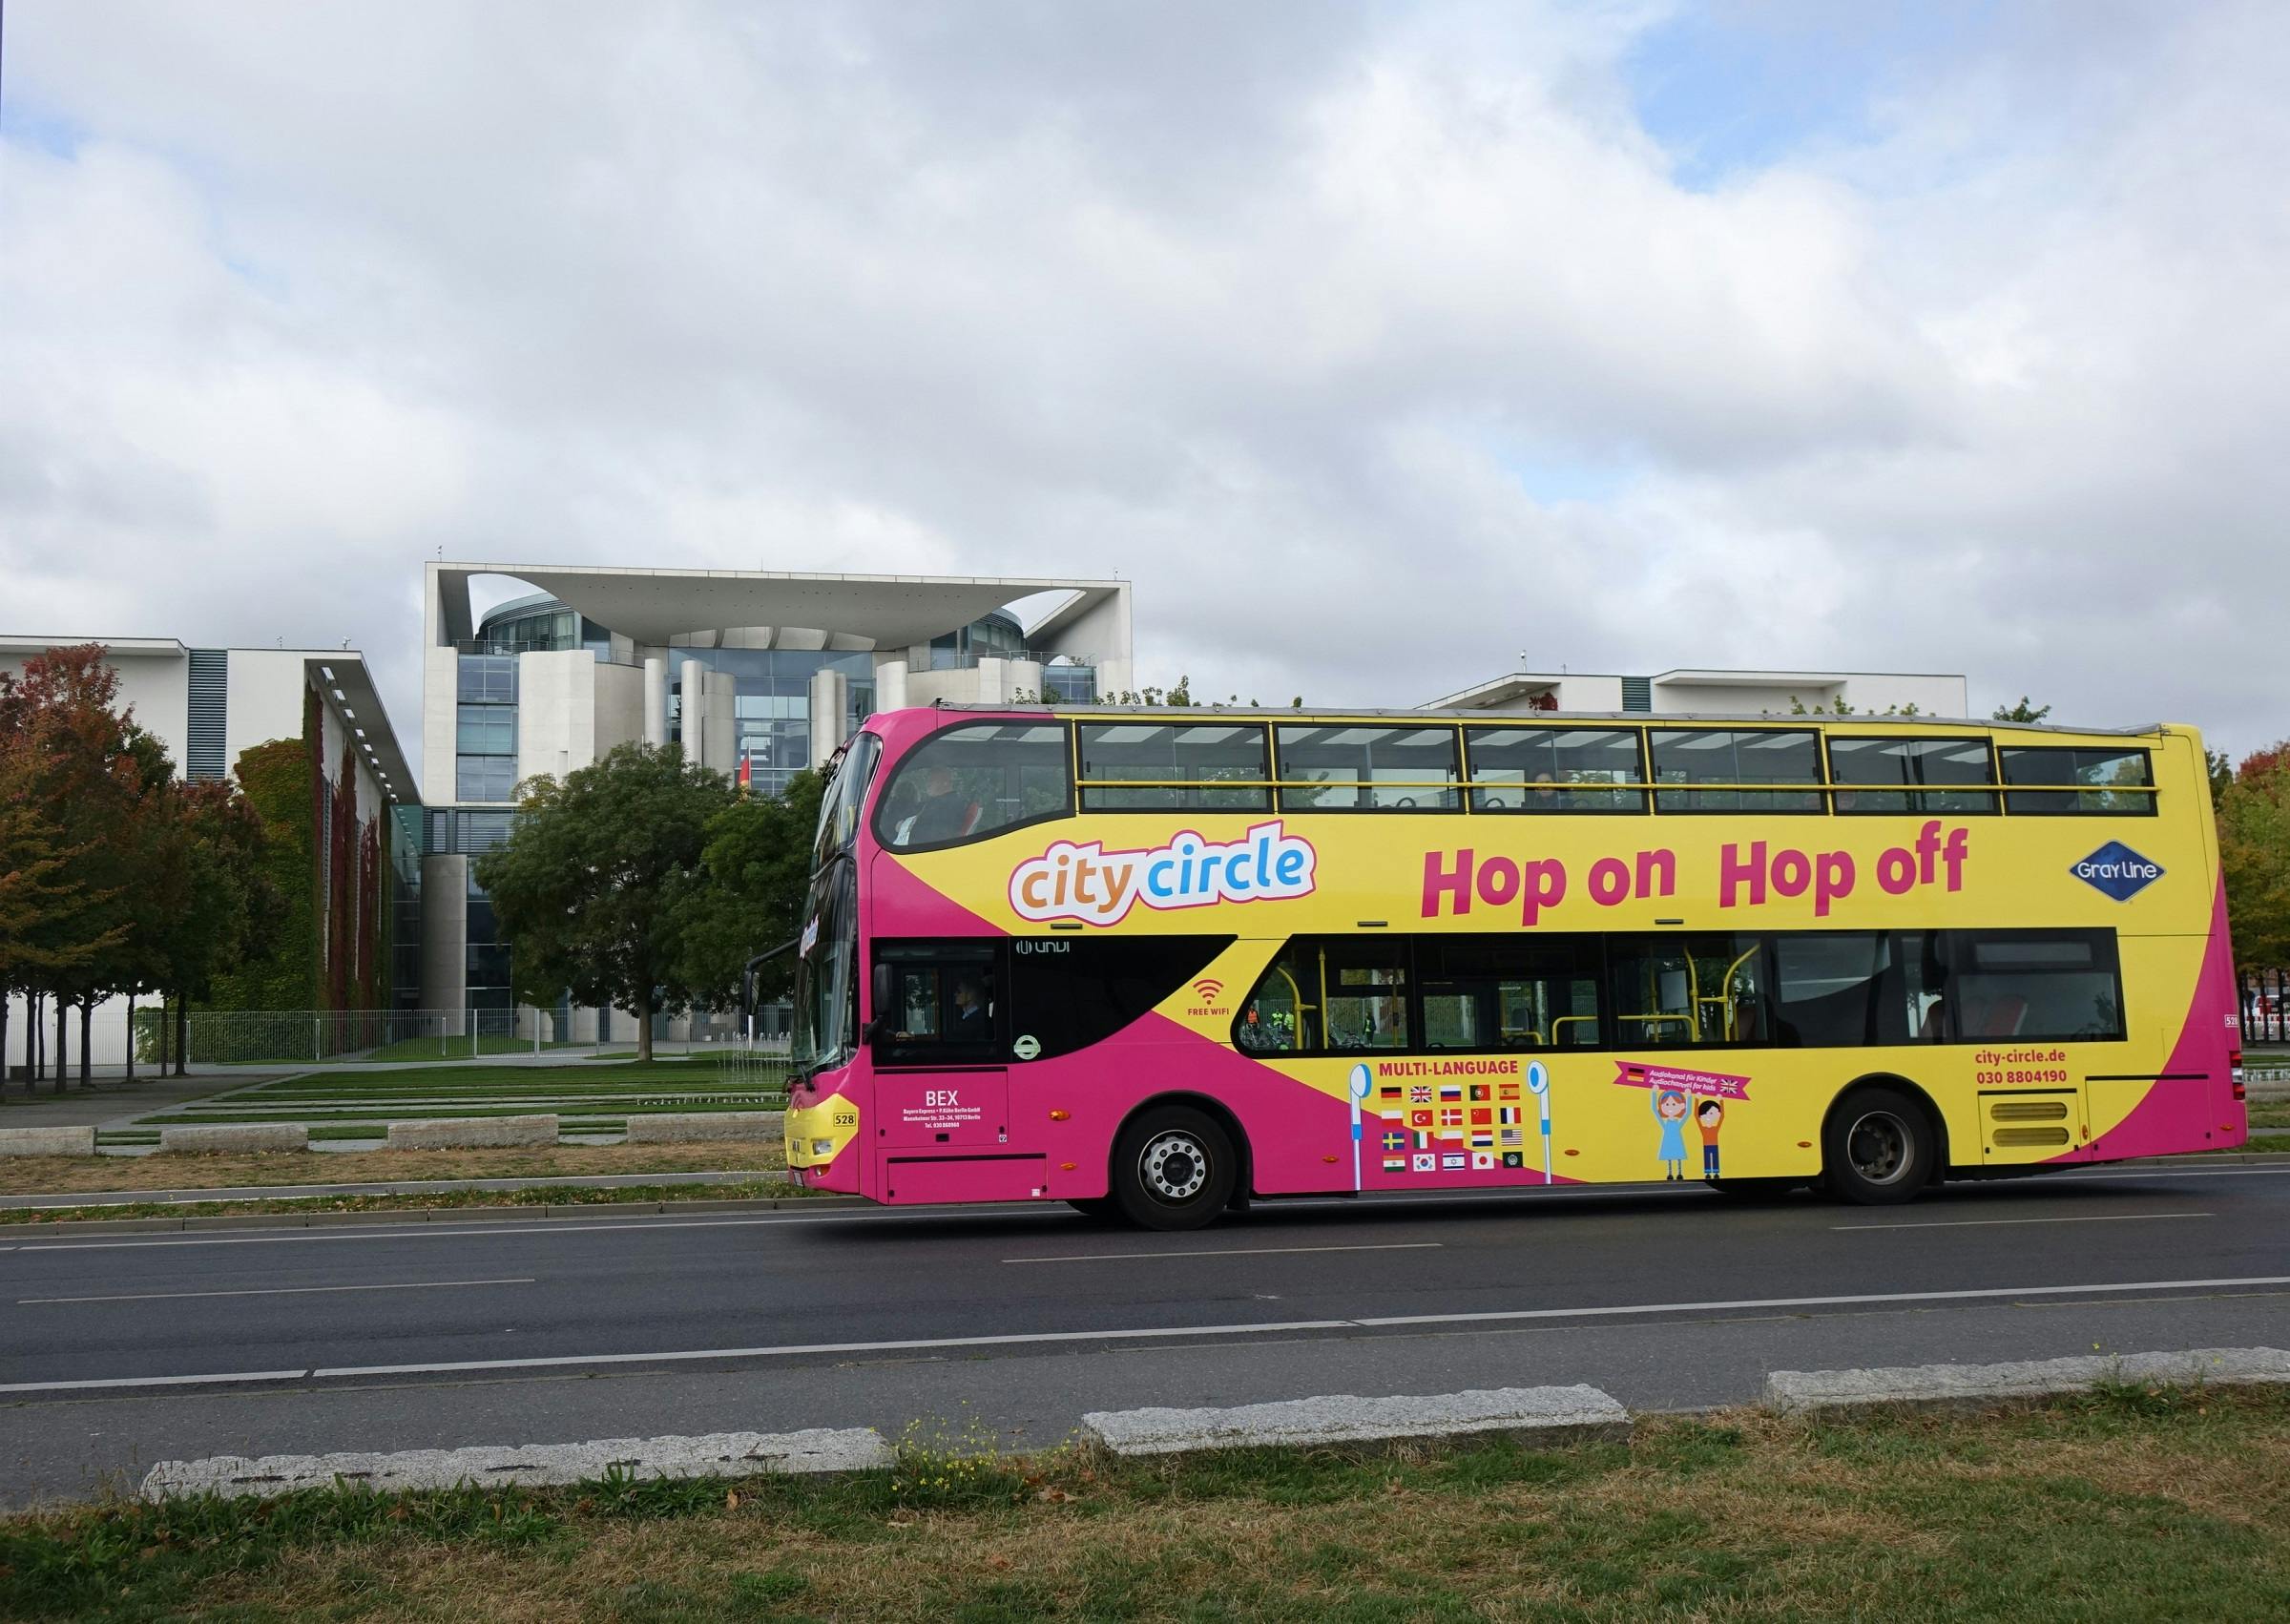 Hop-on hop-off city tour and Spree boat tour combo ticket for 24,48 or 72 hours